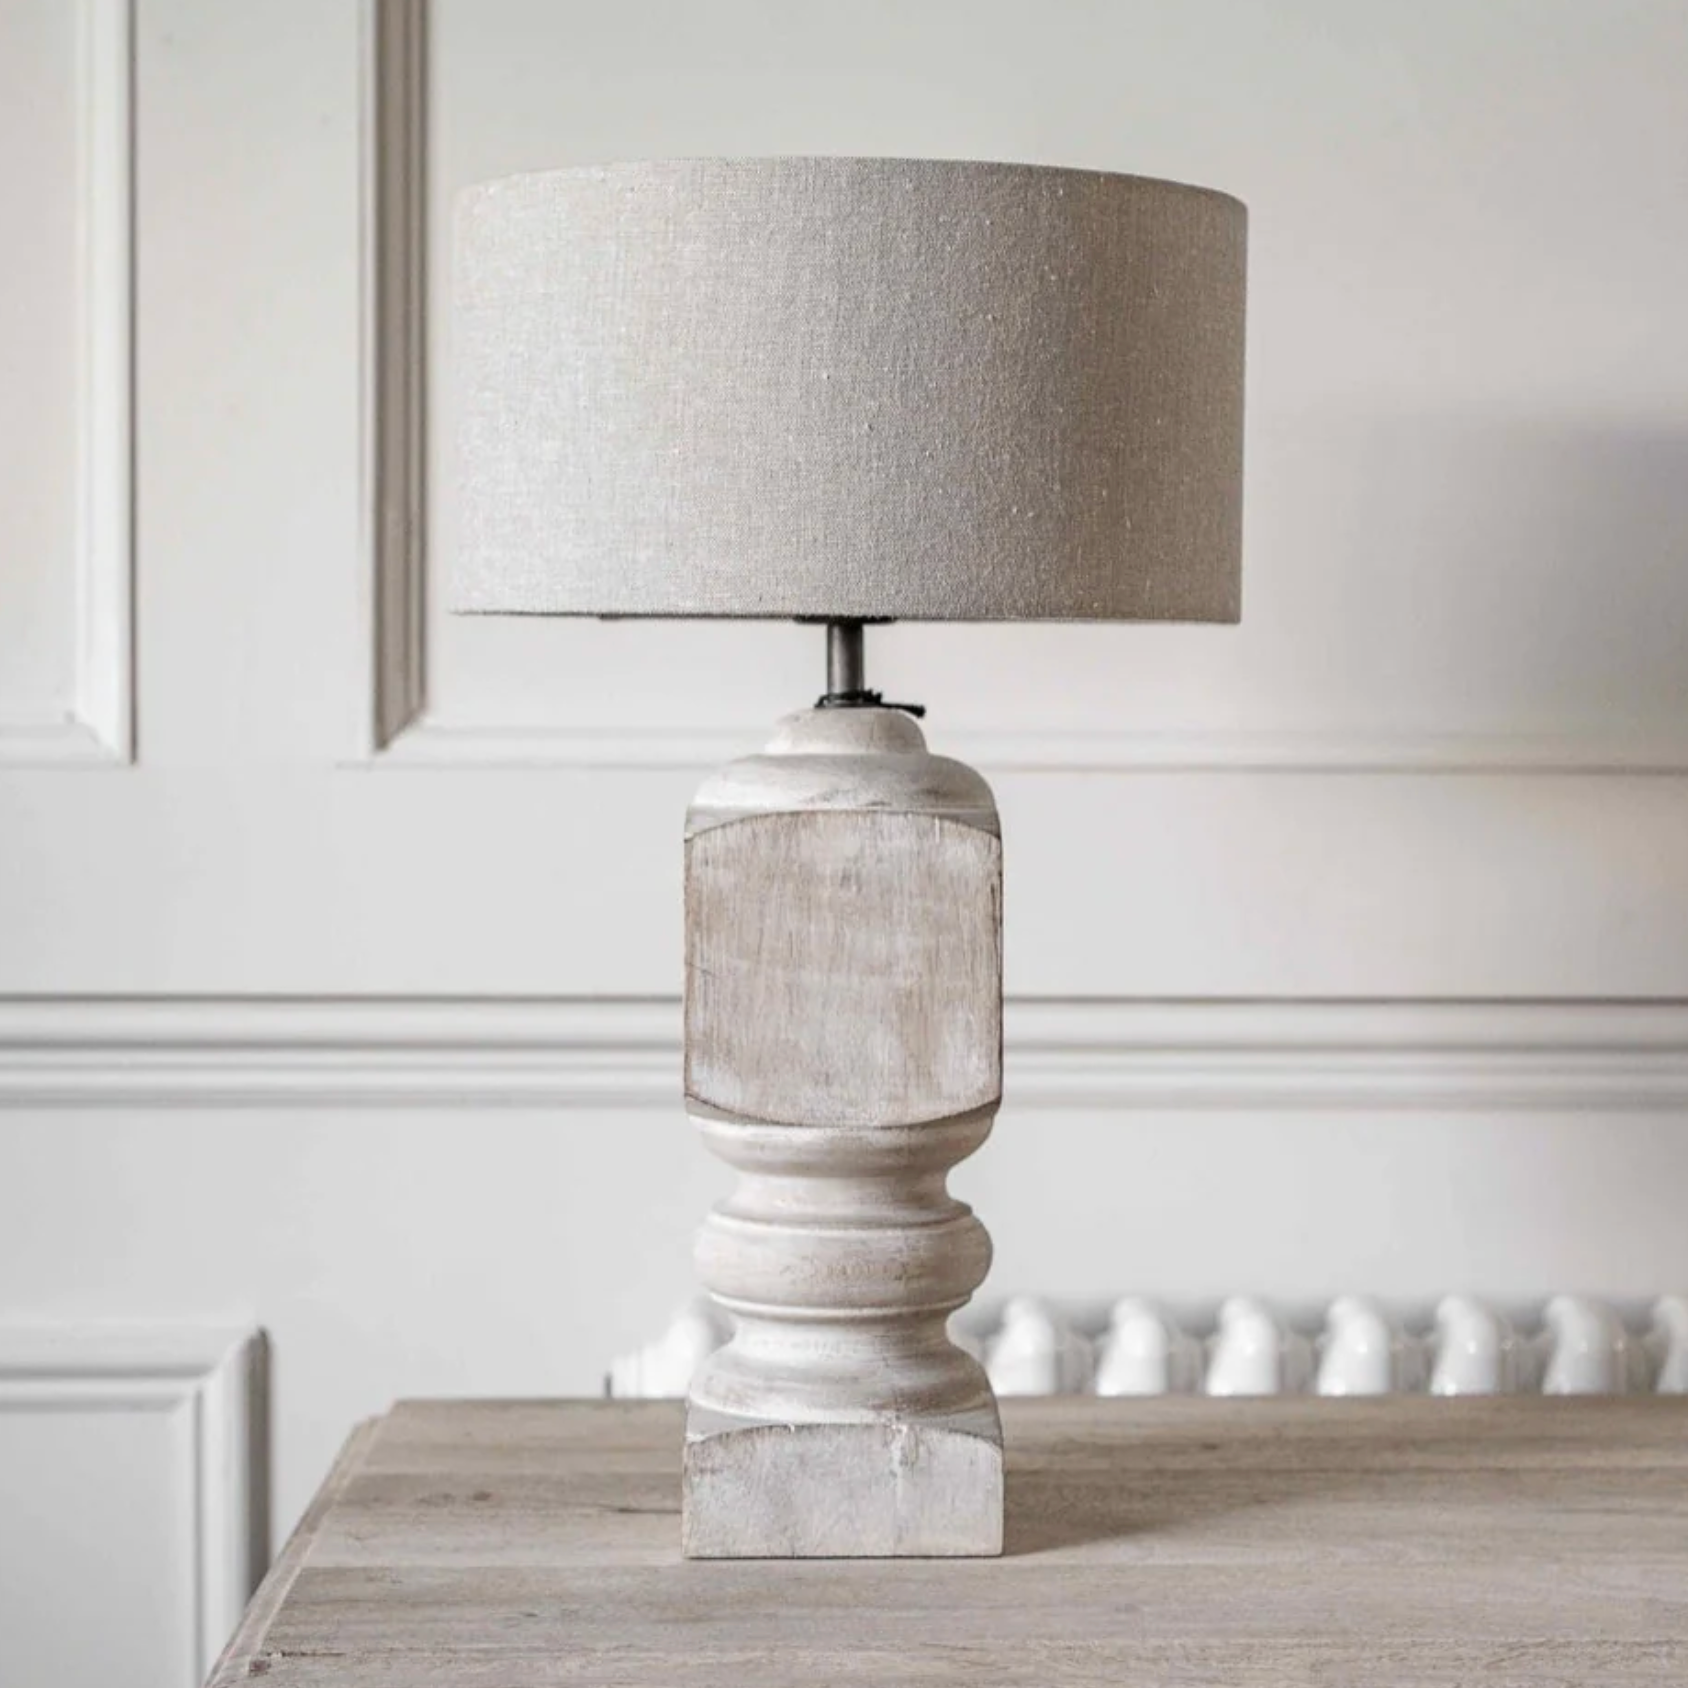 a turned Mango Wood Table Lamp with white washed effect on a wooden table.